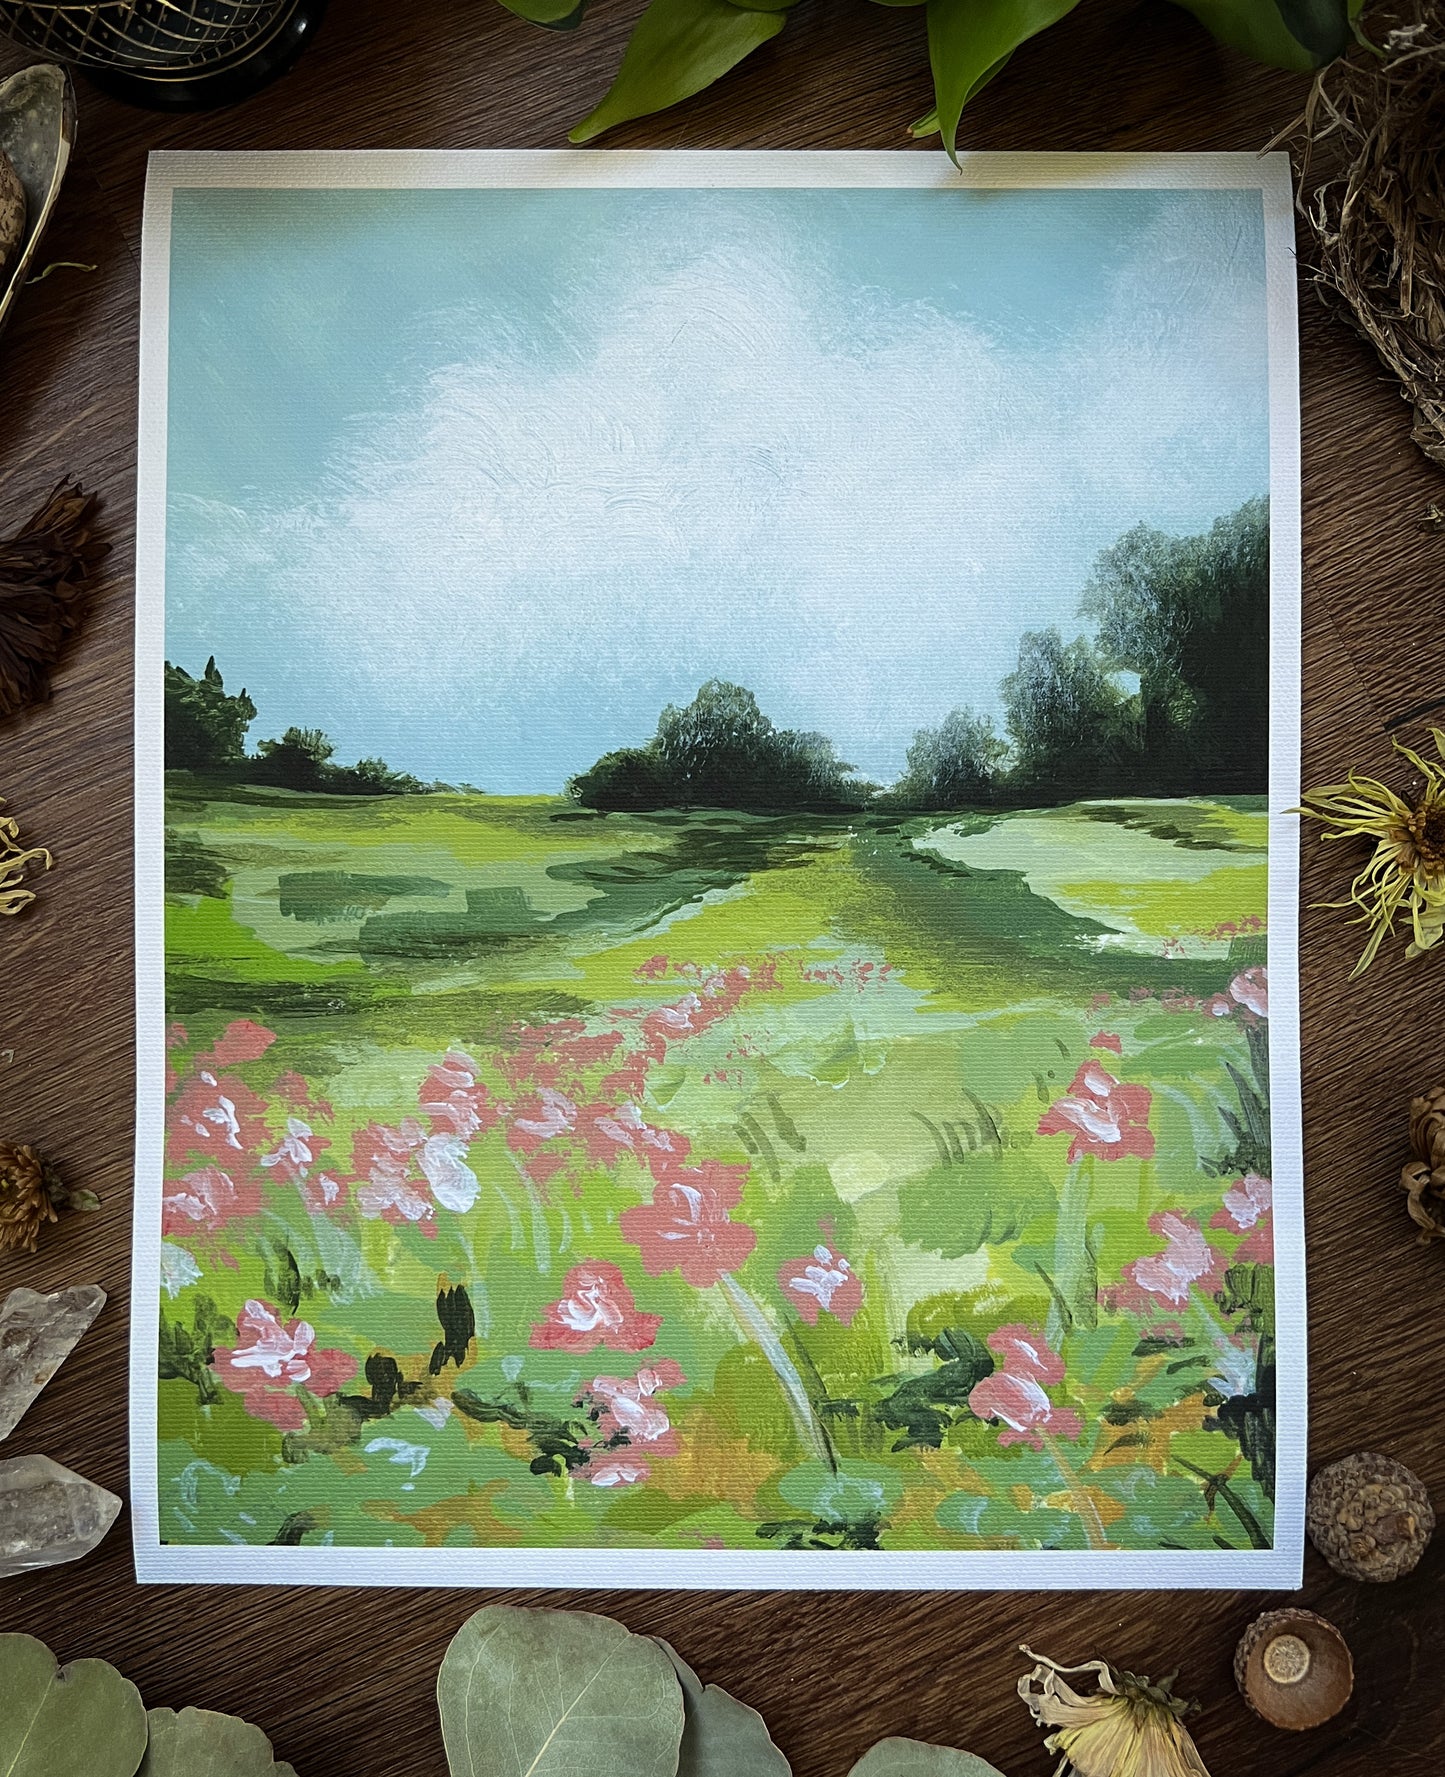 clover meadow - a vertical canvas giclée print from the foothills of the blue ridge mountains in southern appalachia